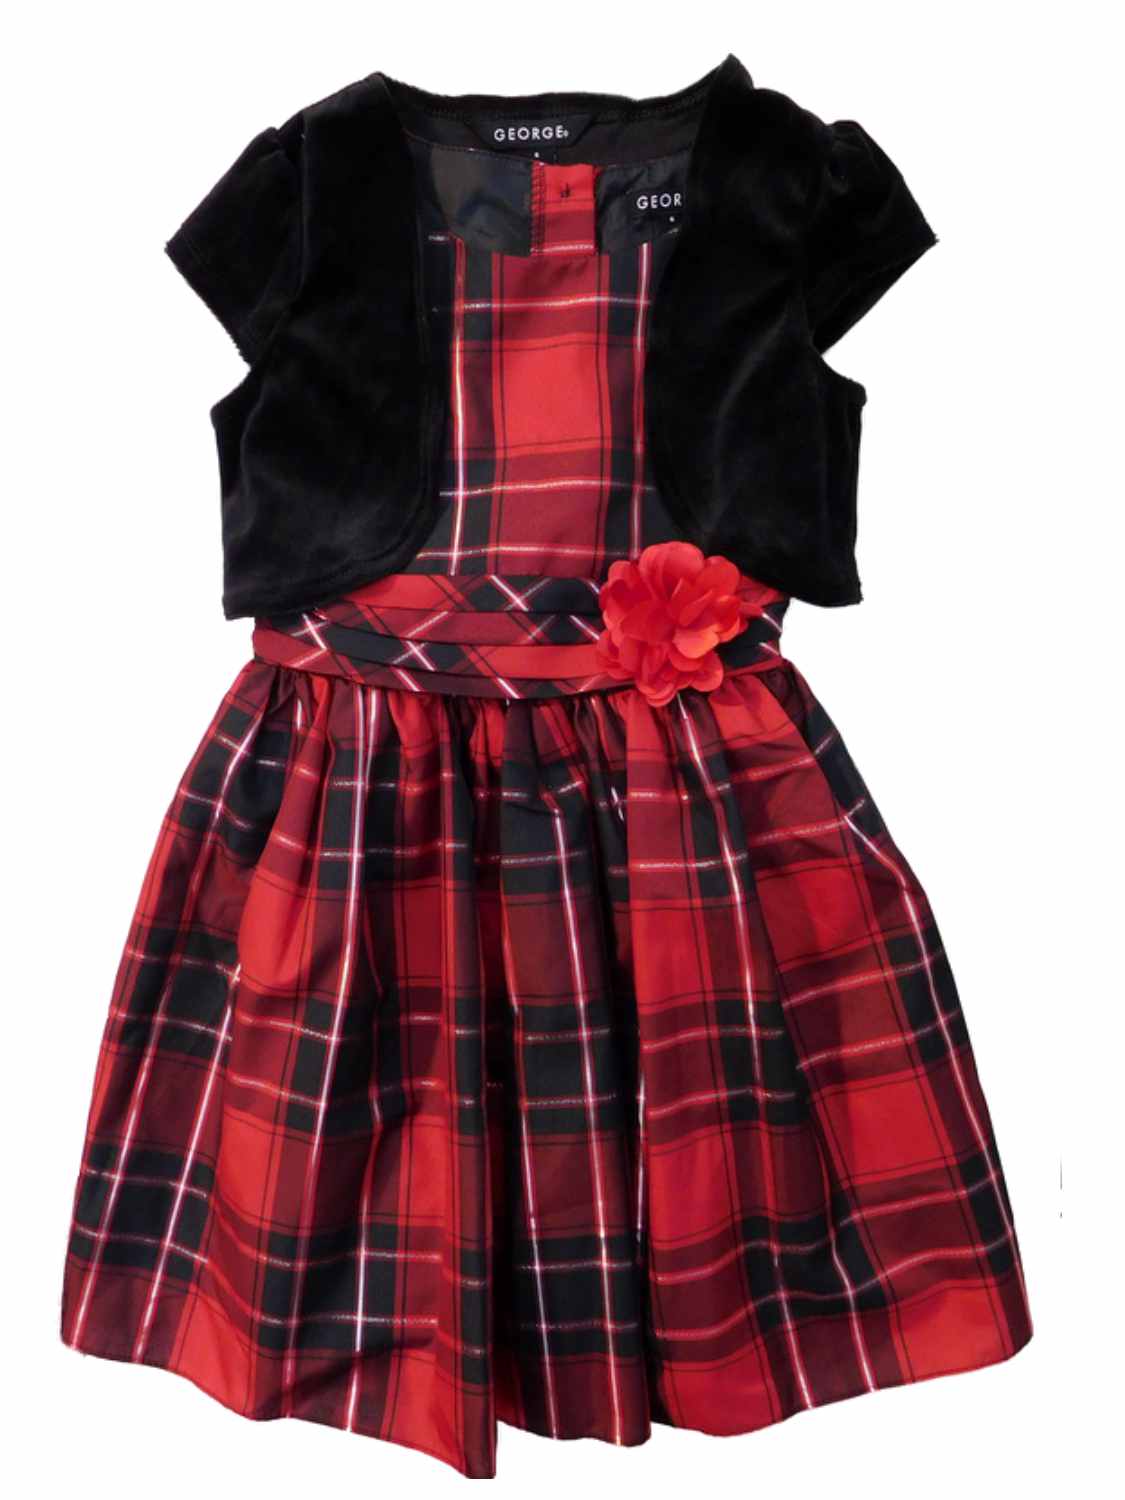 George Girls 2 PC Red Plaid Holiday Party Dress & Black Velour Caplet Set